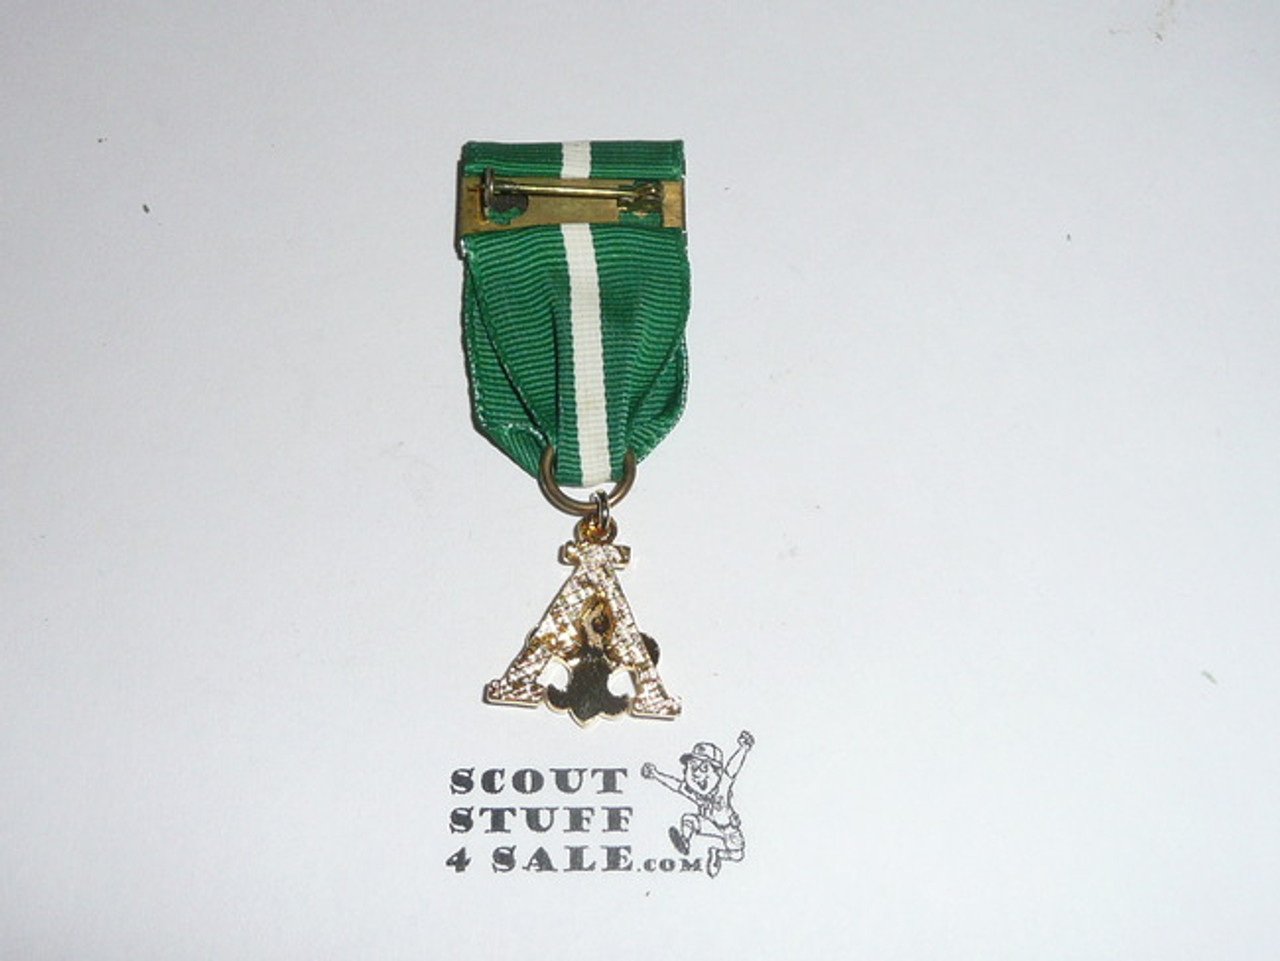 Scouter's Training Award Medal with Green/white Ribbon (A Design), 10k gold filled, shows wear